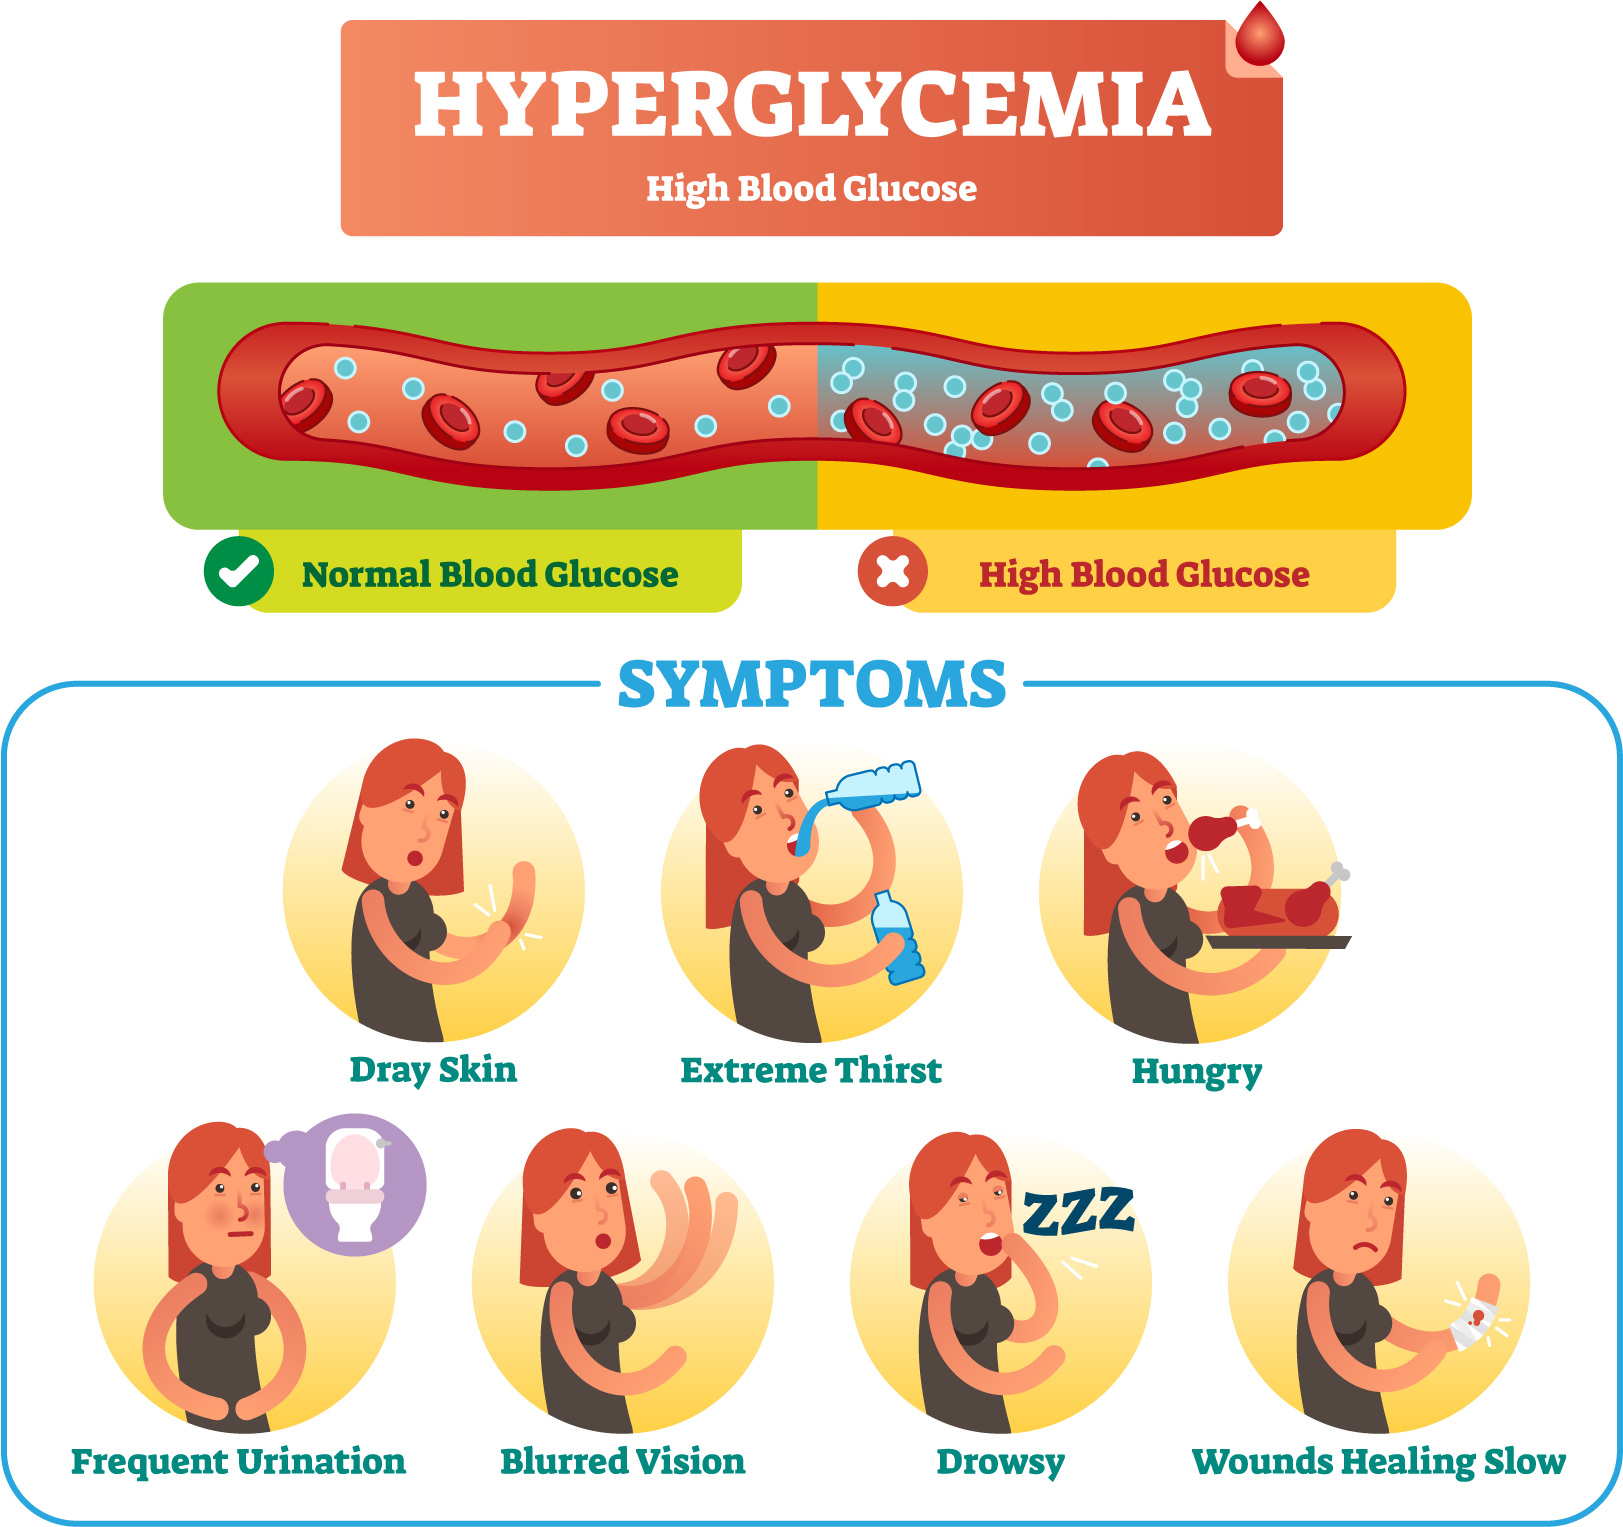 What are the symptoms of high blood glucose?